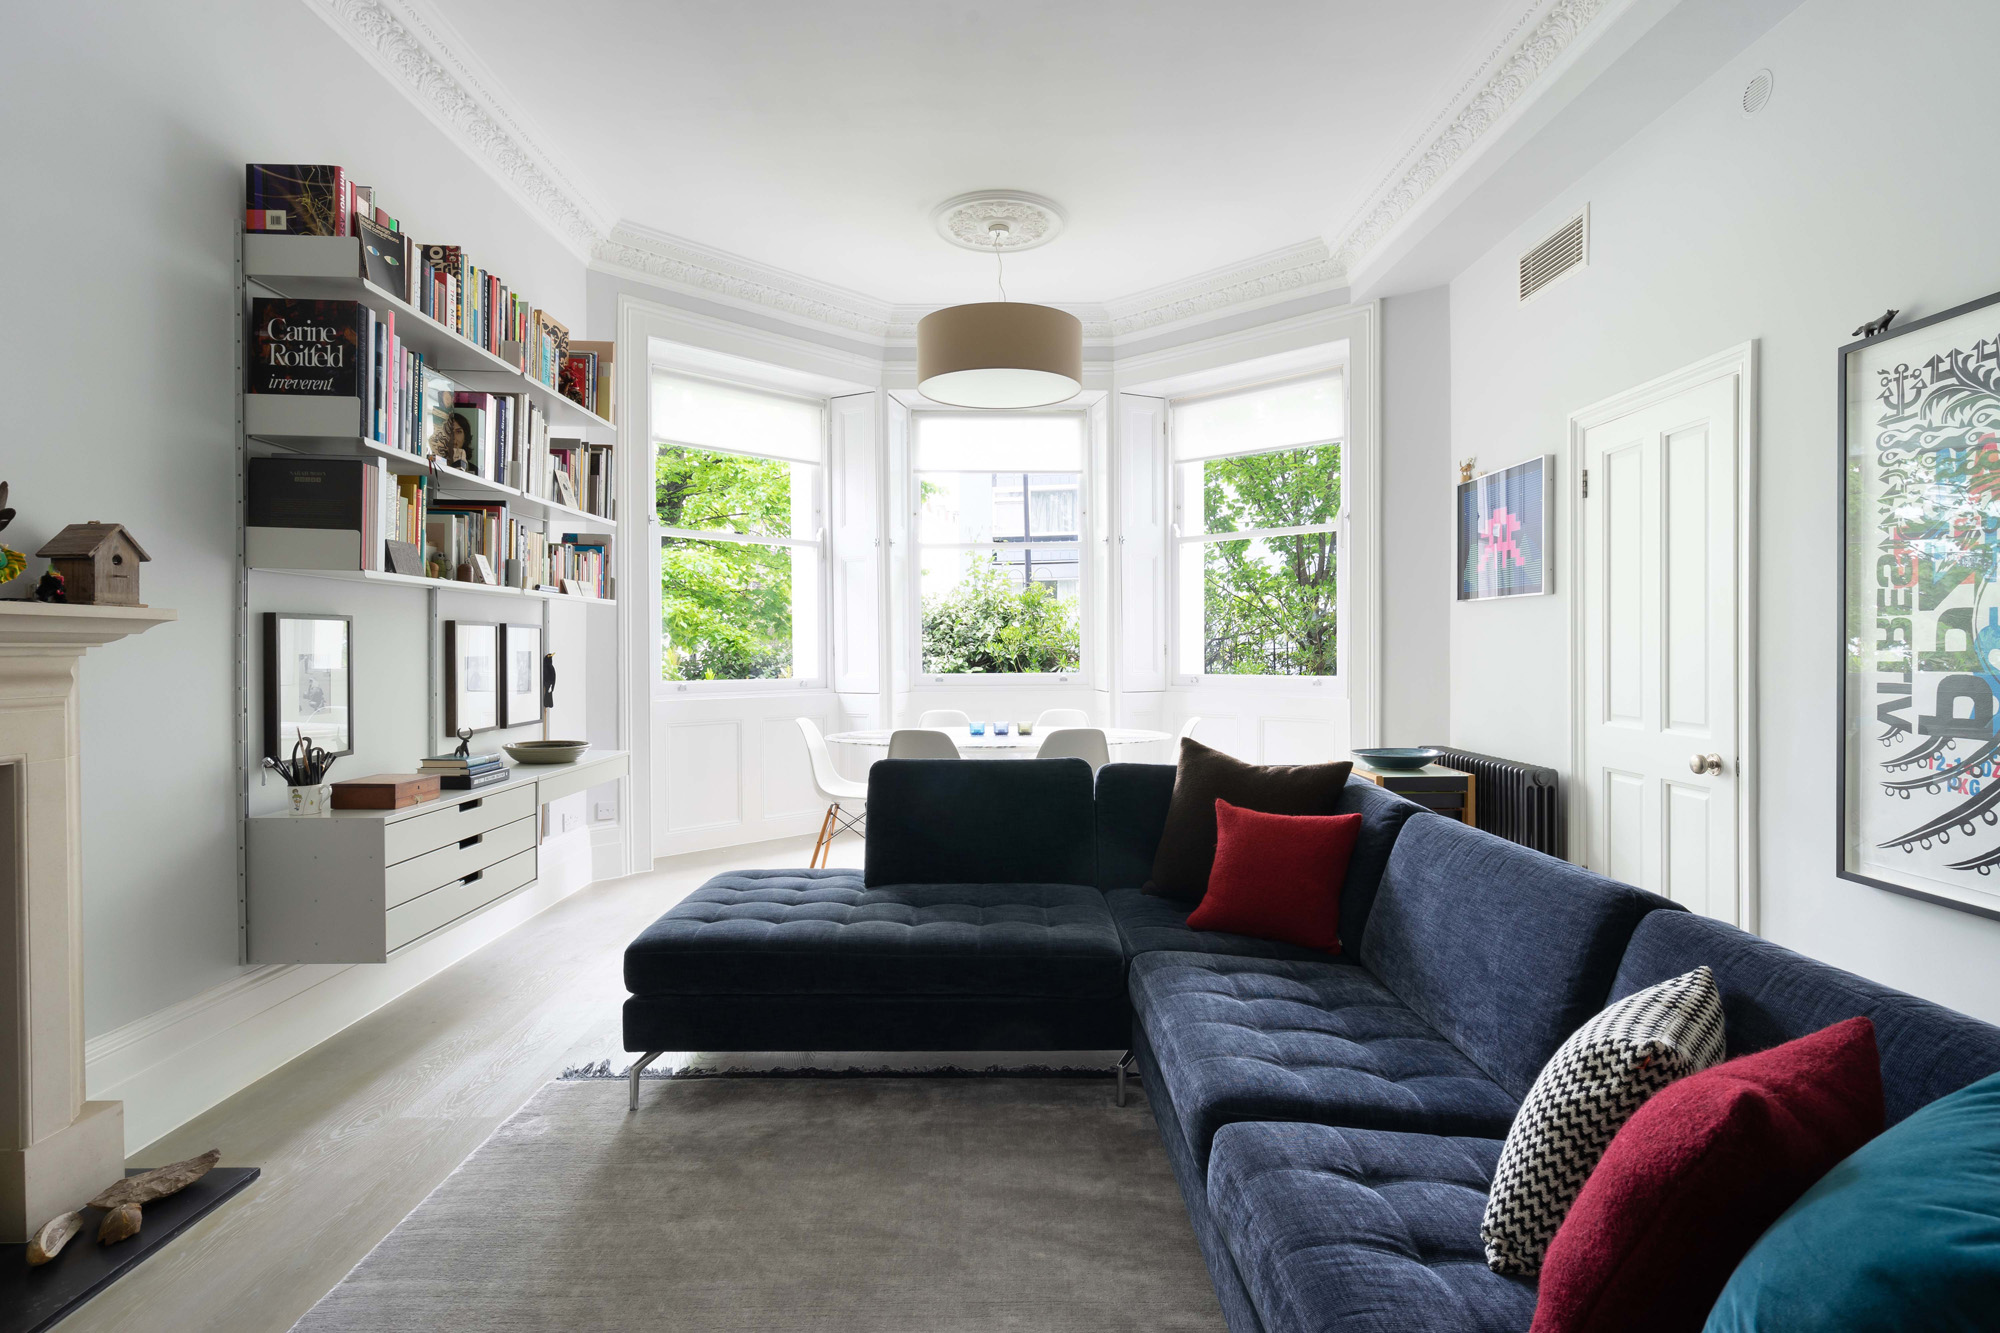 Lansdowne Road W11 for sale, living room with L-shaped sofa and bay windows